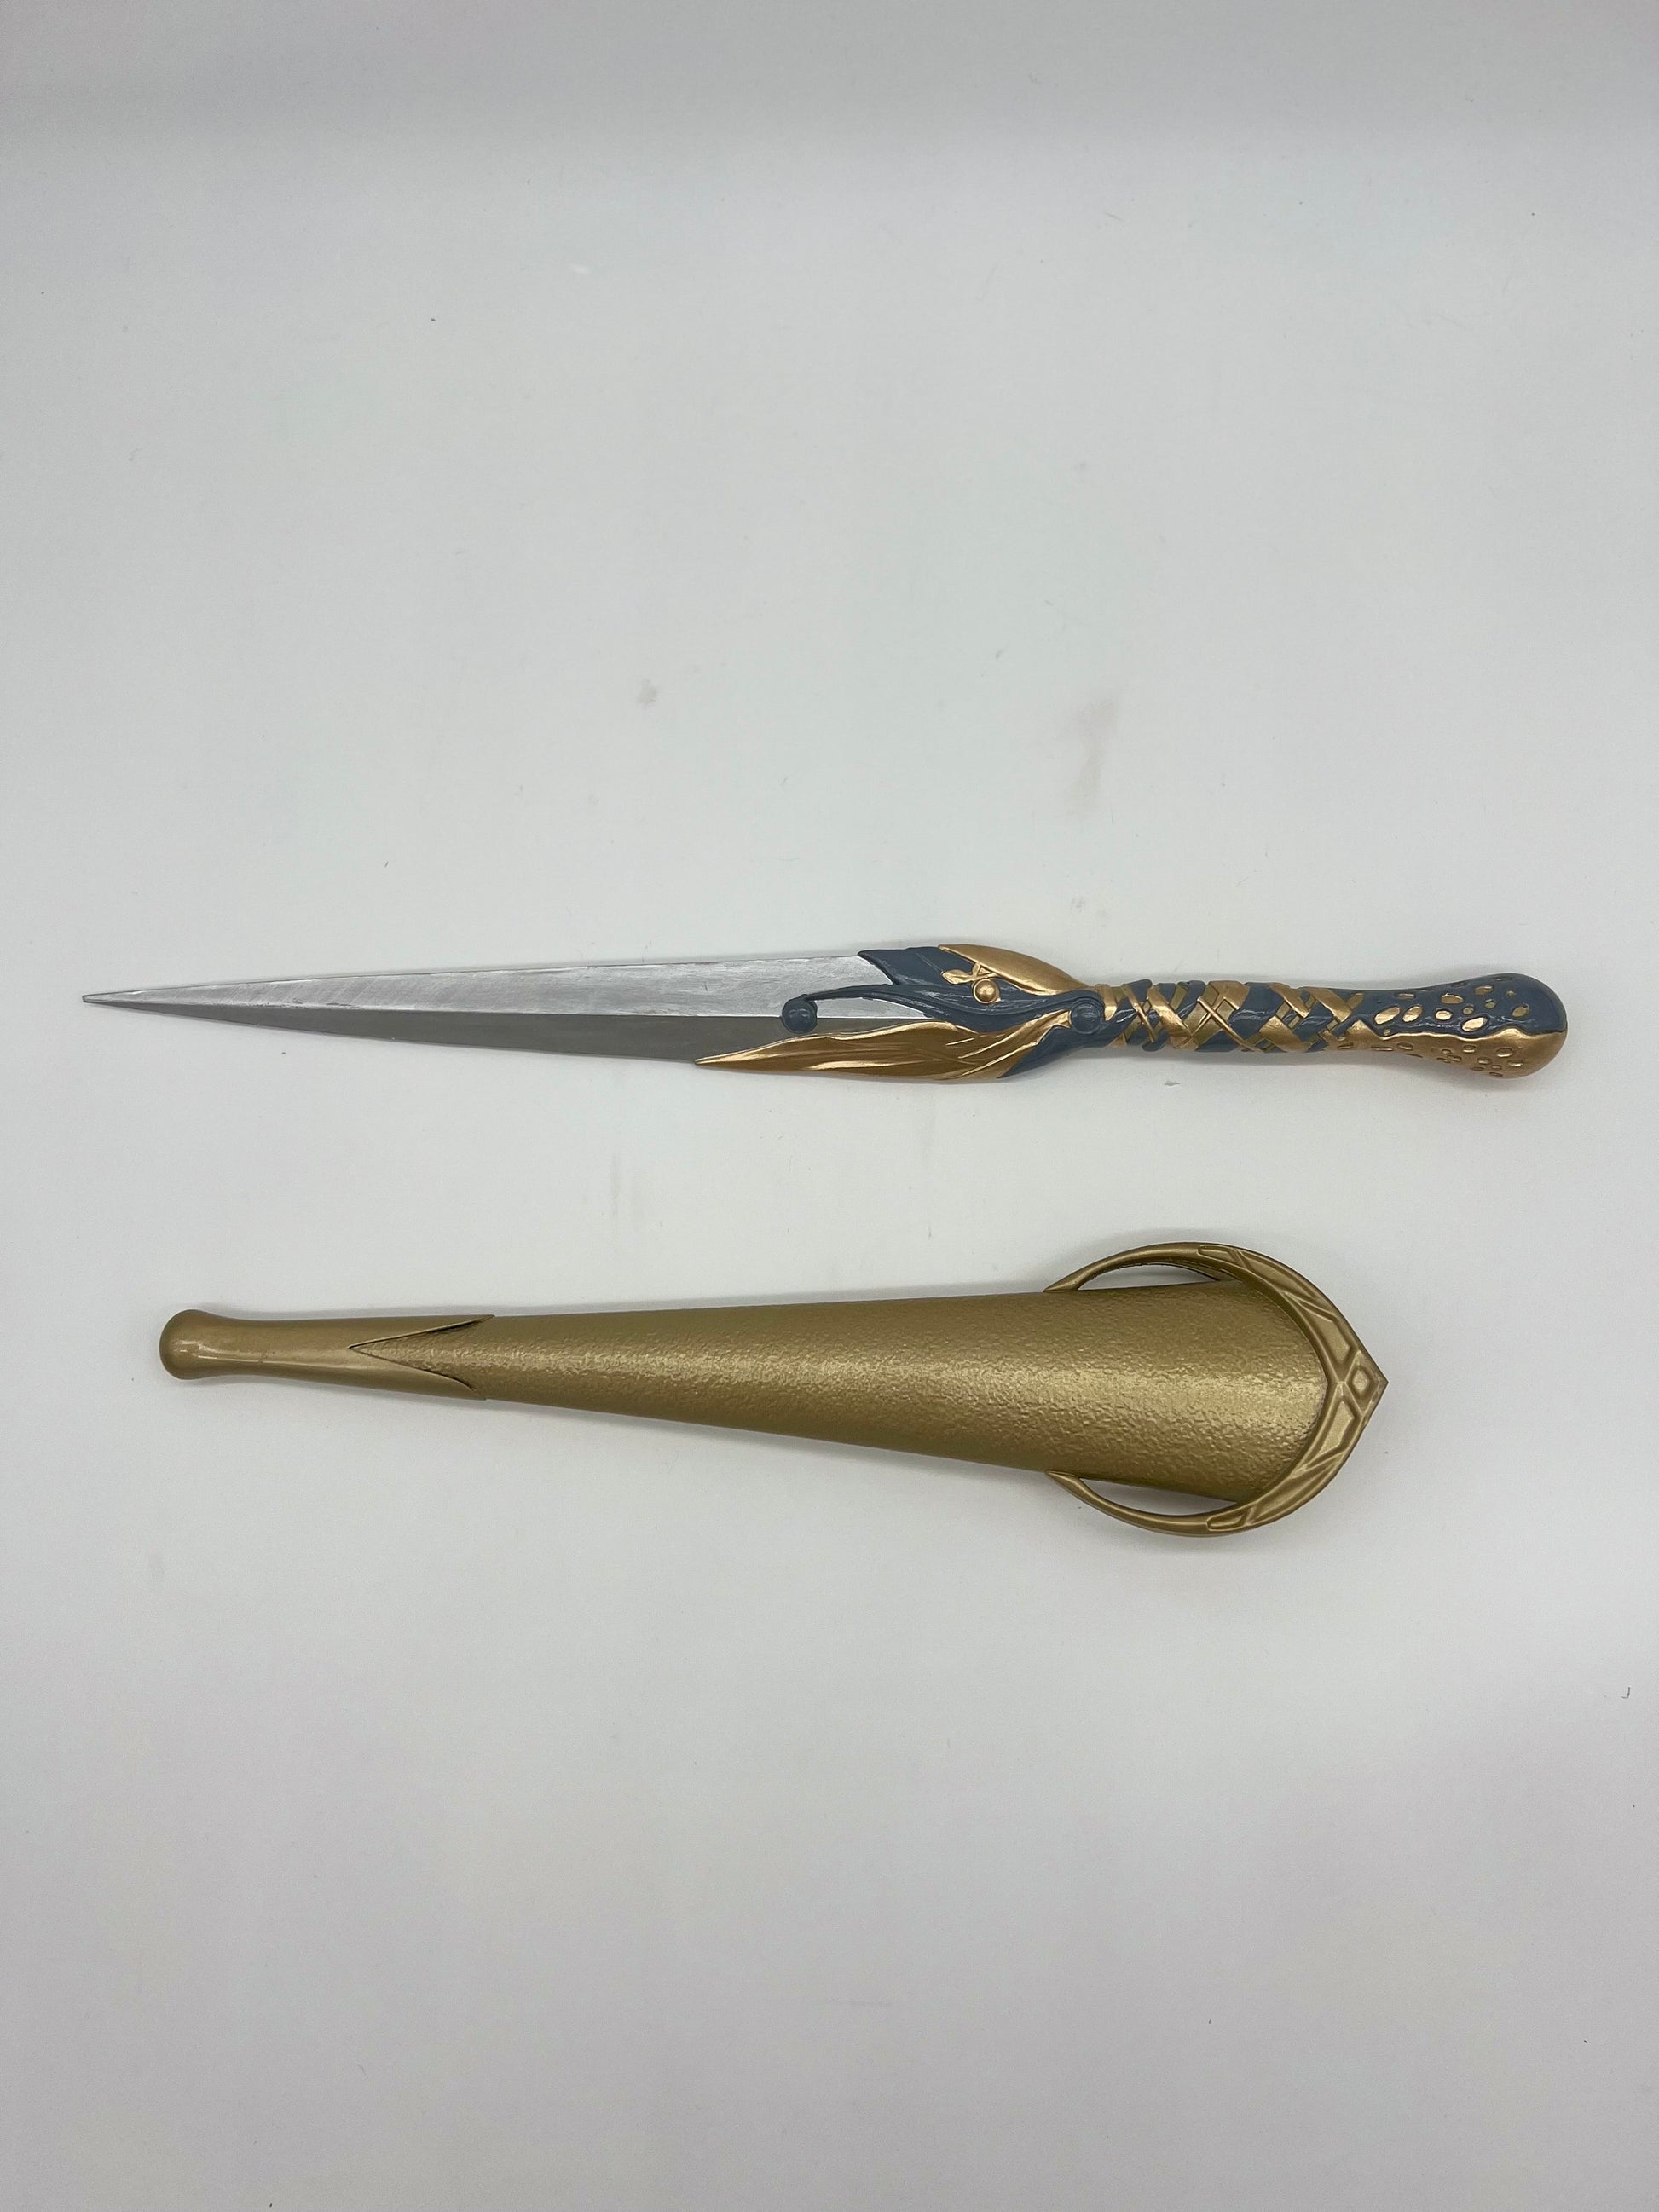 Galadriels Dagger from Rings of Power